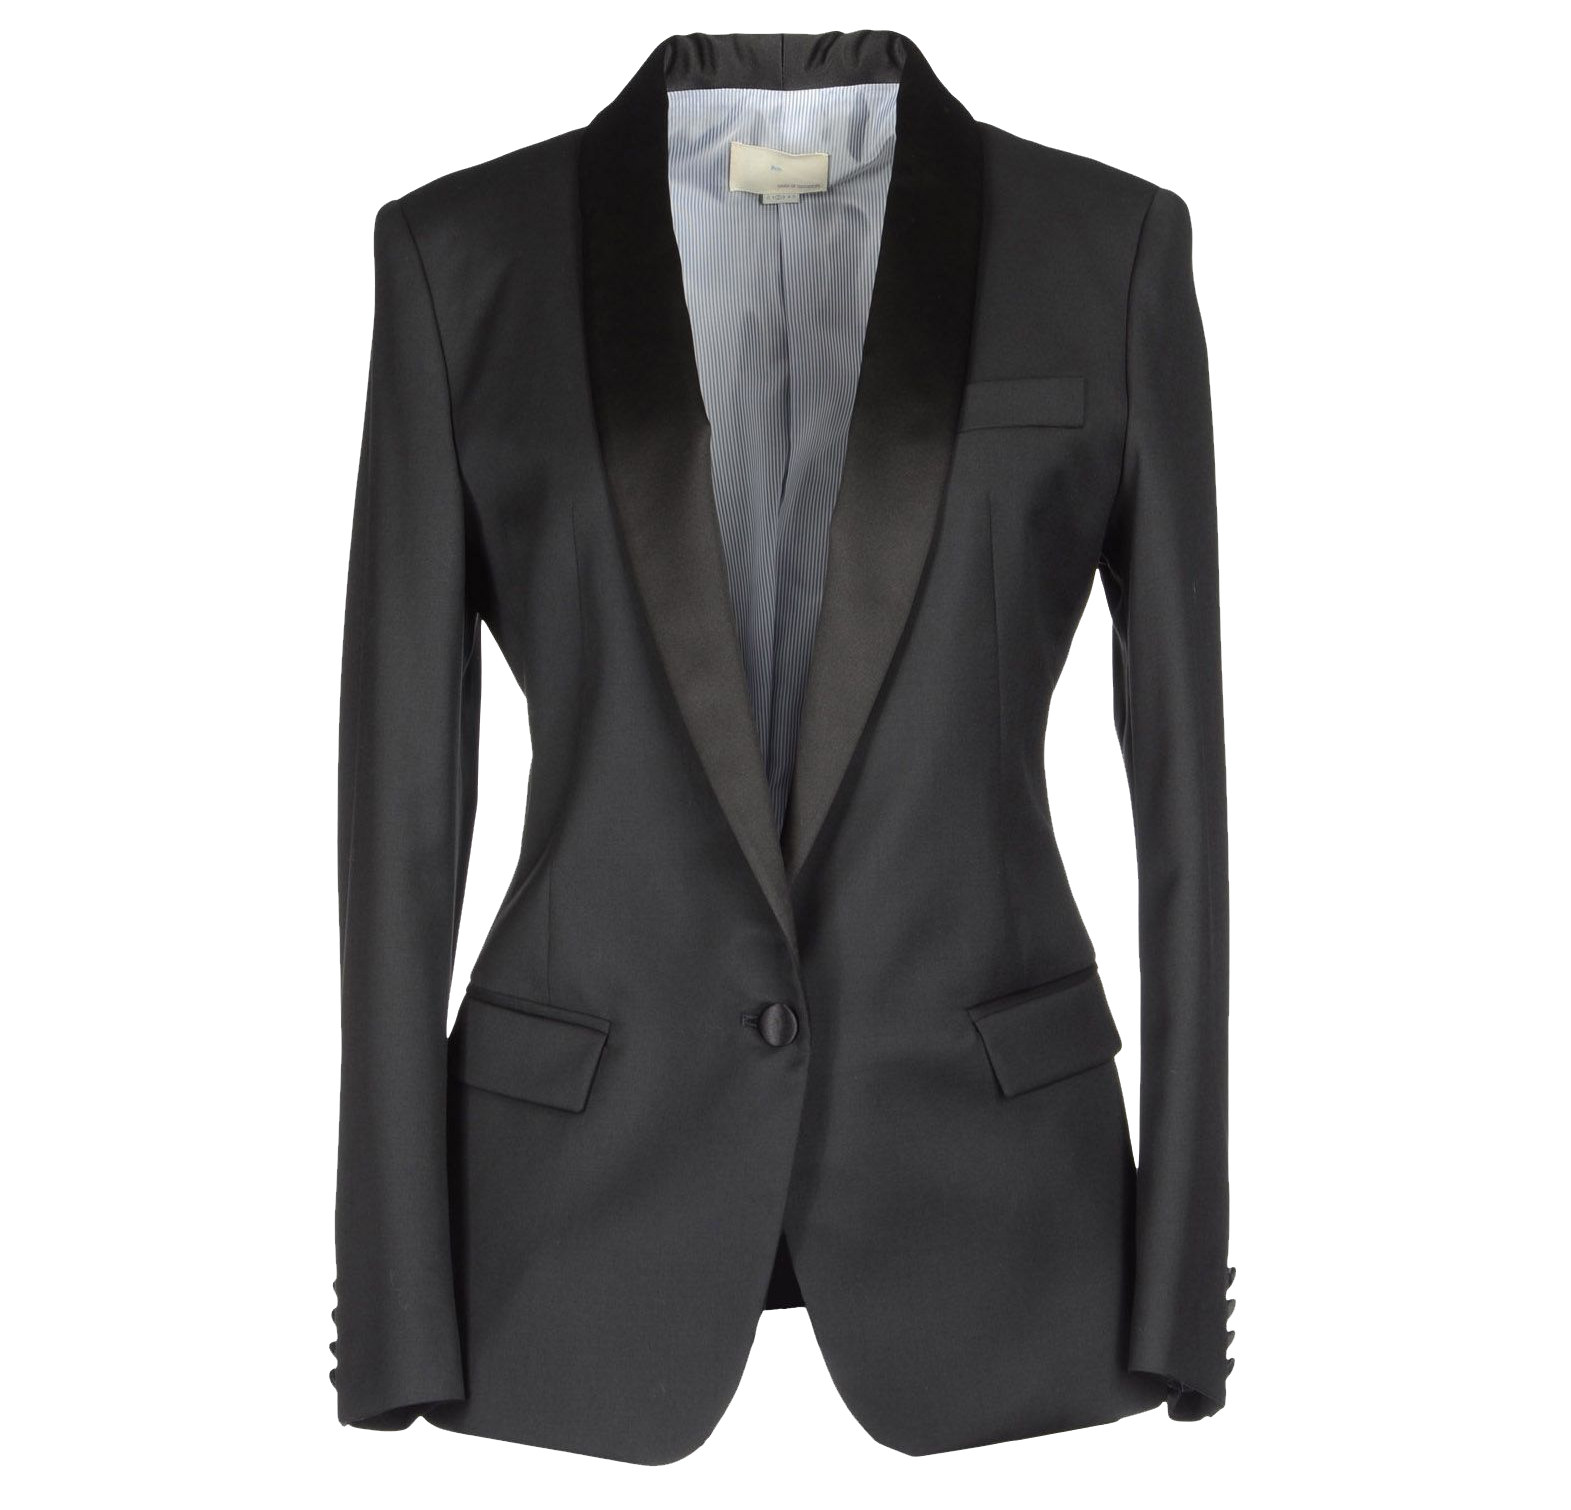 Blazer PNG Scarica limmagine | PNG Arts